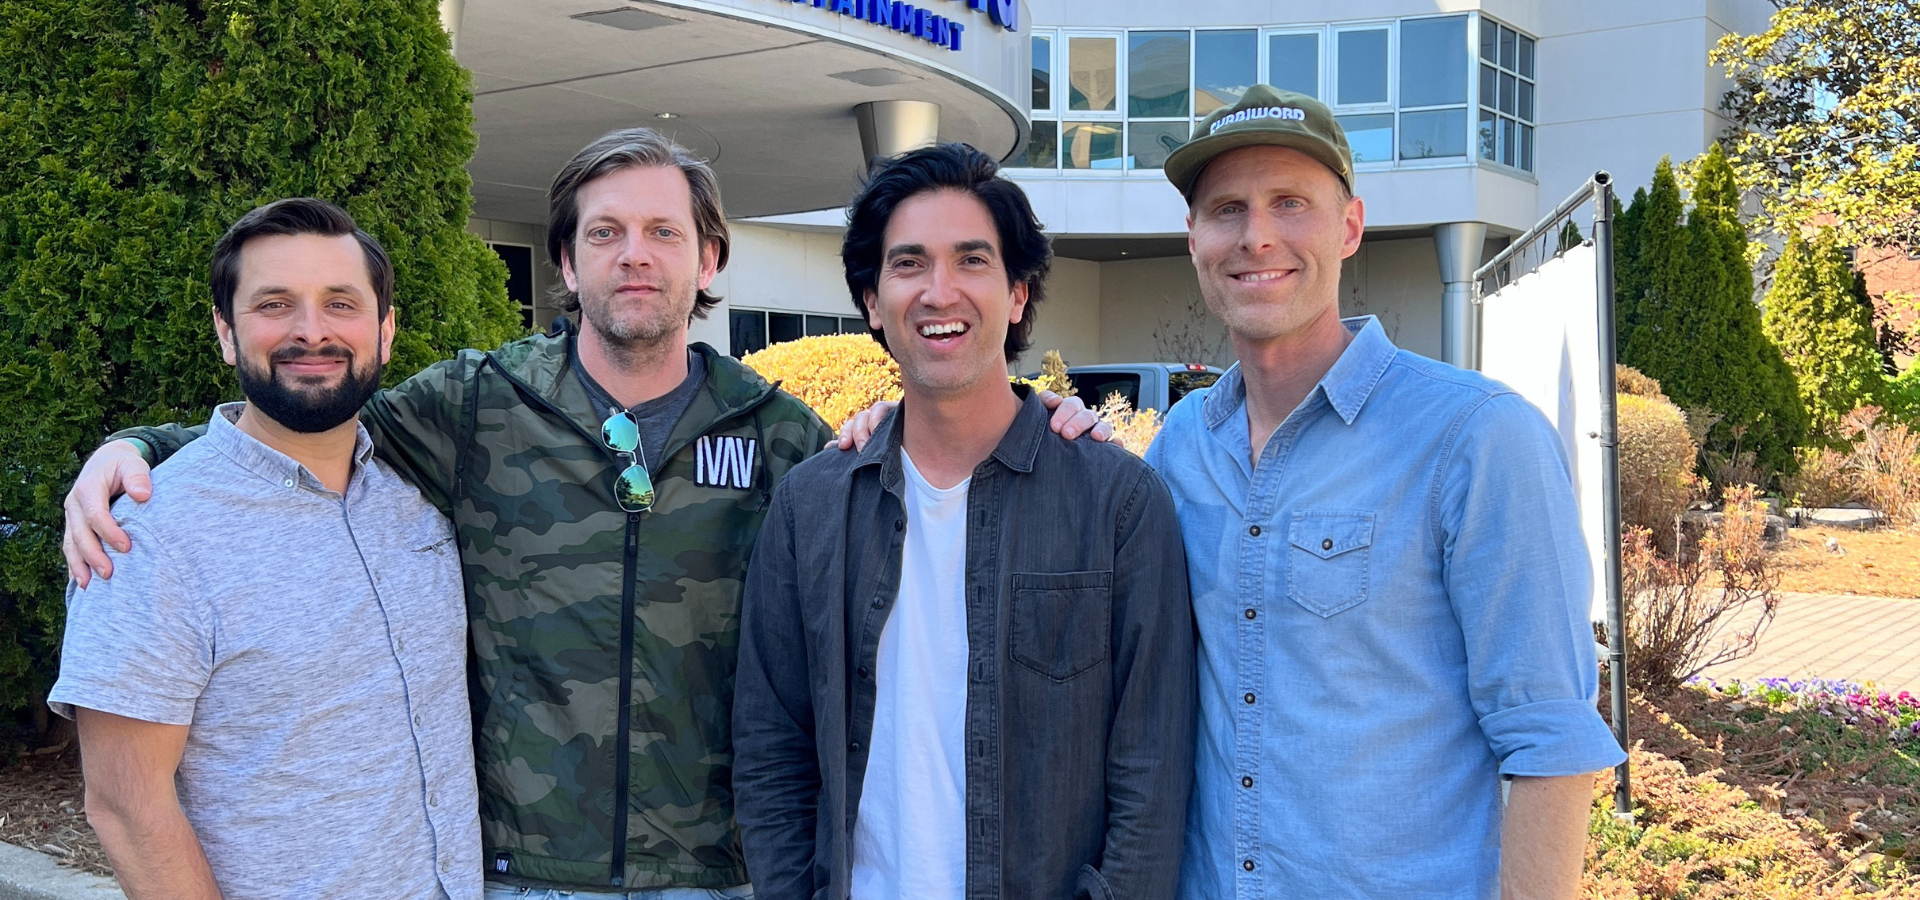 Sanctus Real's Chris Rohman Signs Publishing Deal with Curb l Word Music Publishing